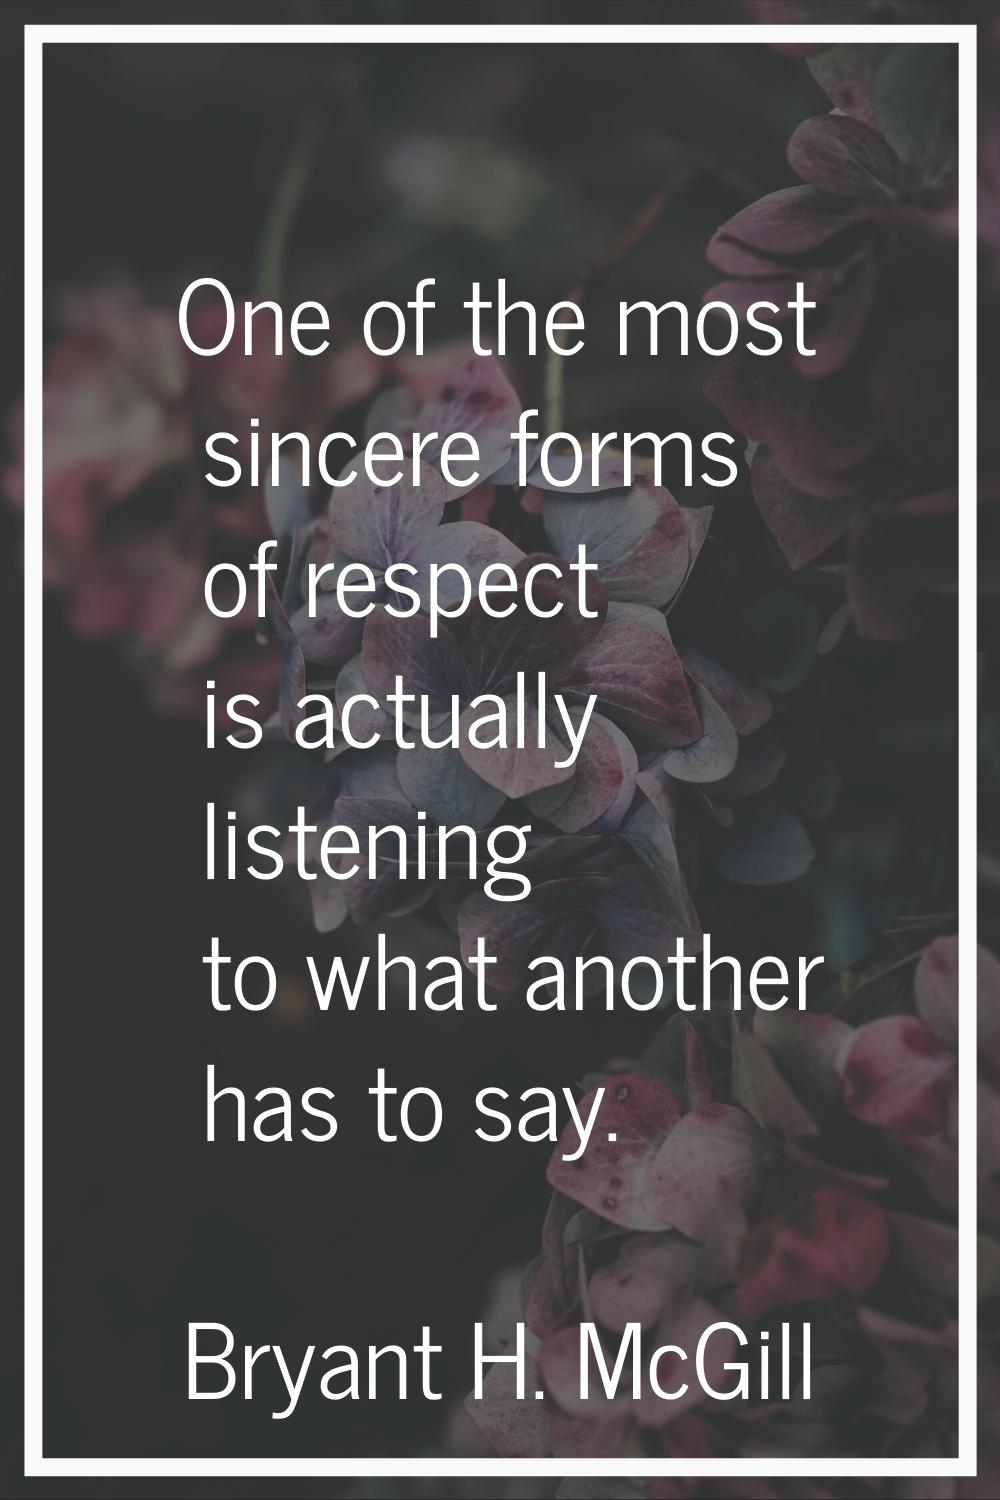 One of the most sincere forms of respect is actually listening to what another has to say.